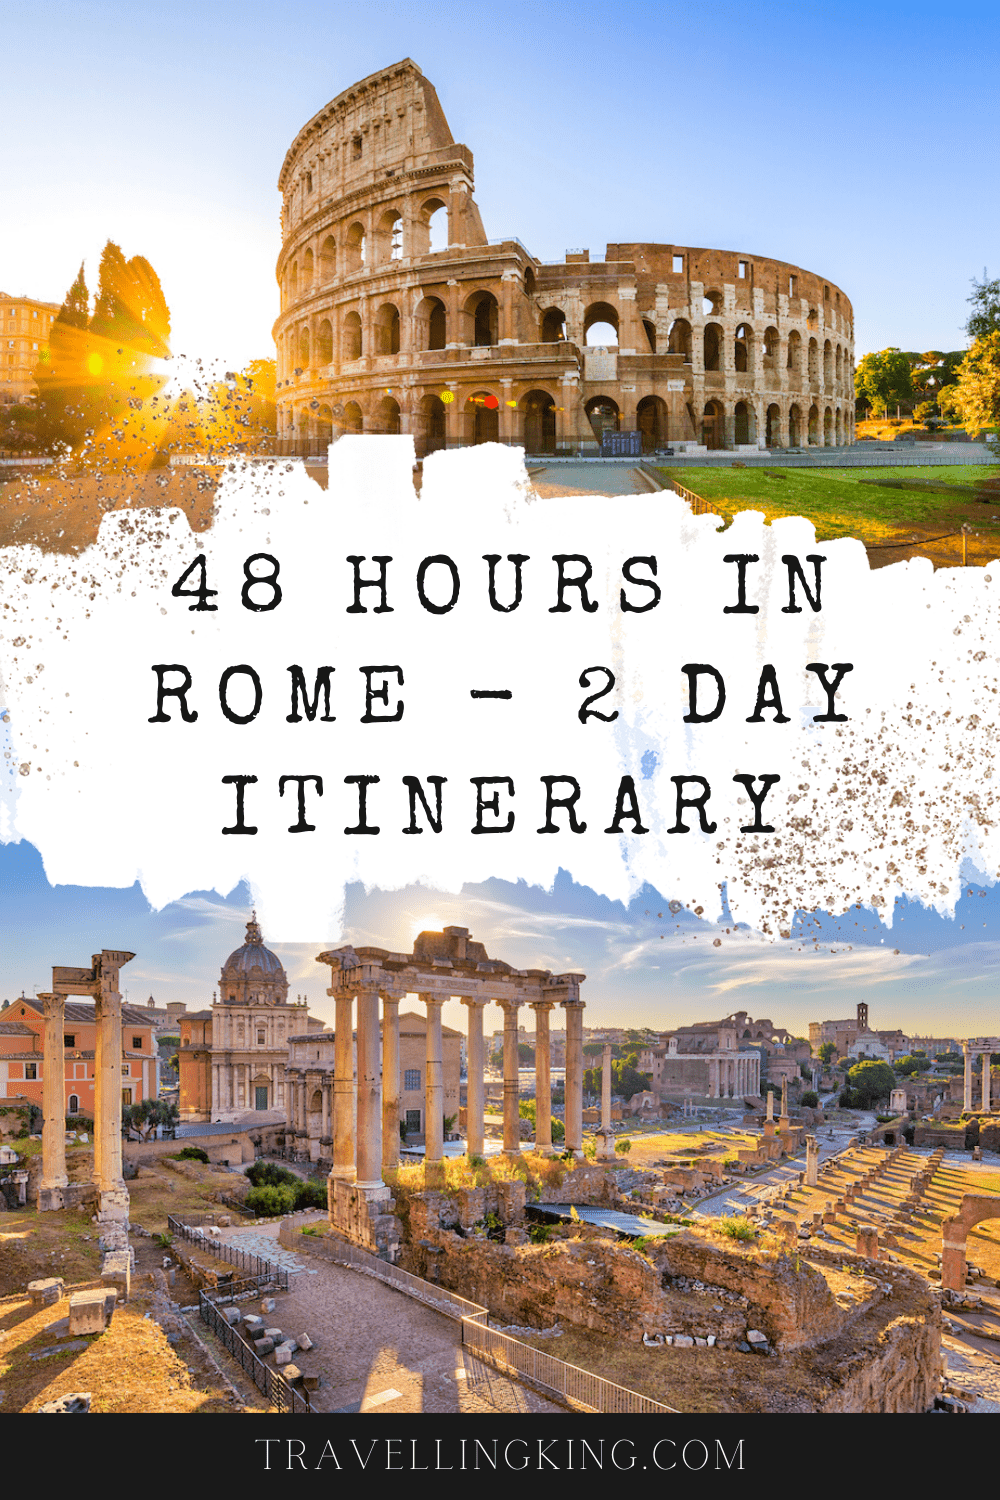 48 Hours in Rome - 2 Day Itinerary